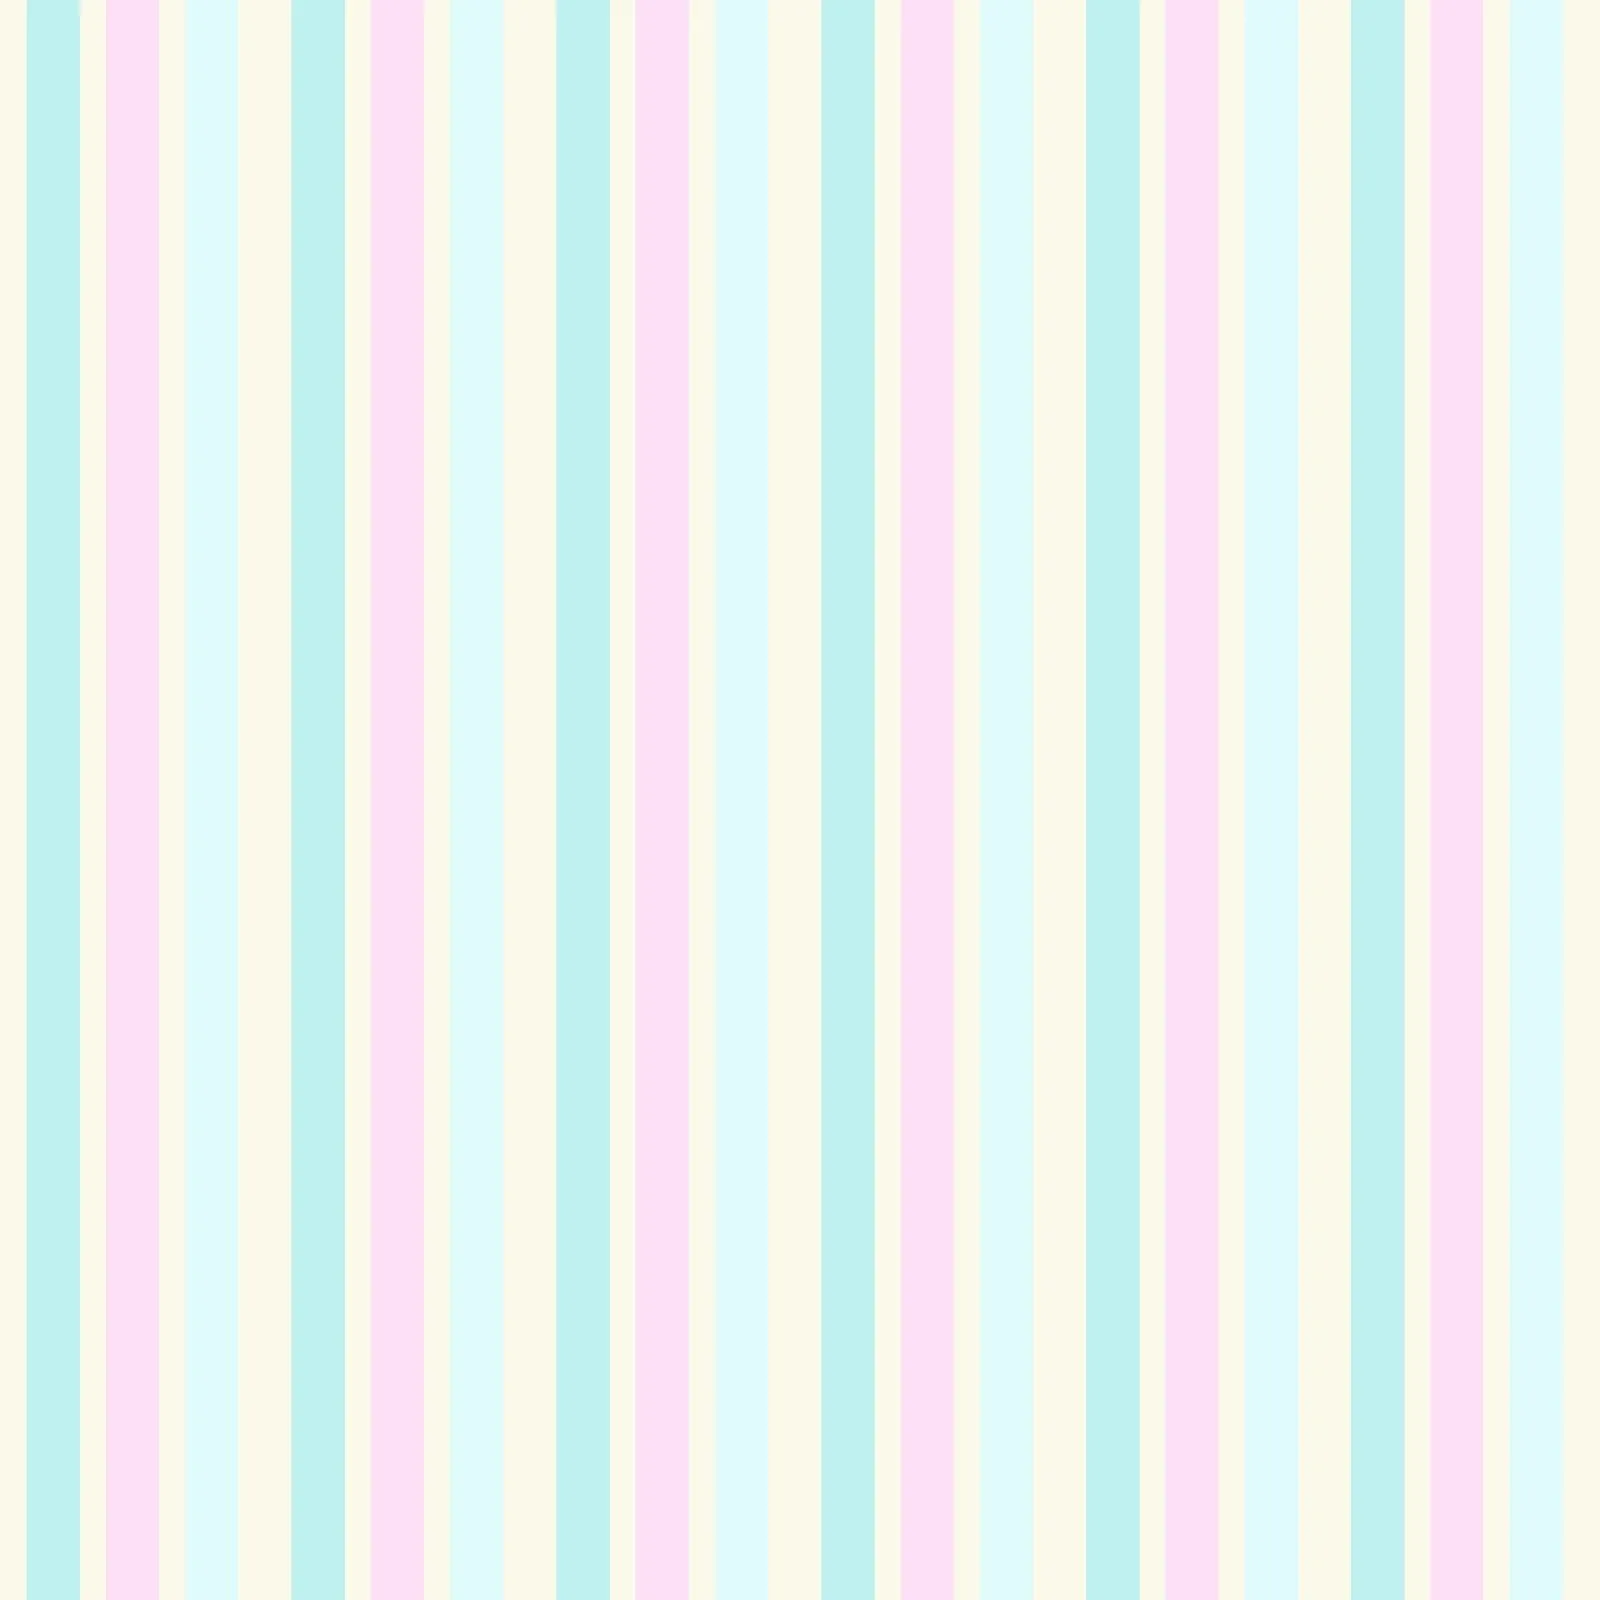 Stampin D'Amour: Free Digital Scrapbook Paper - Pink, Blue, and ...